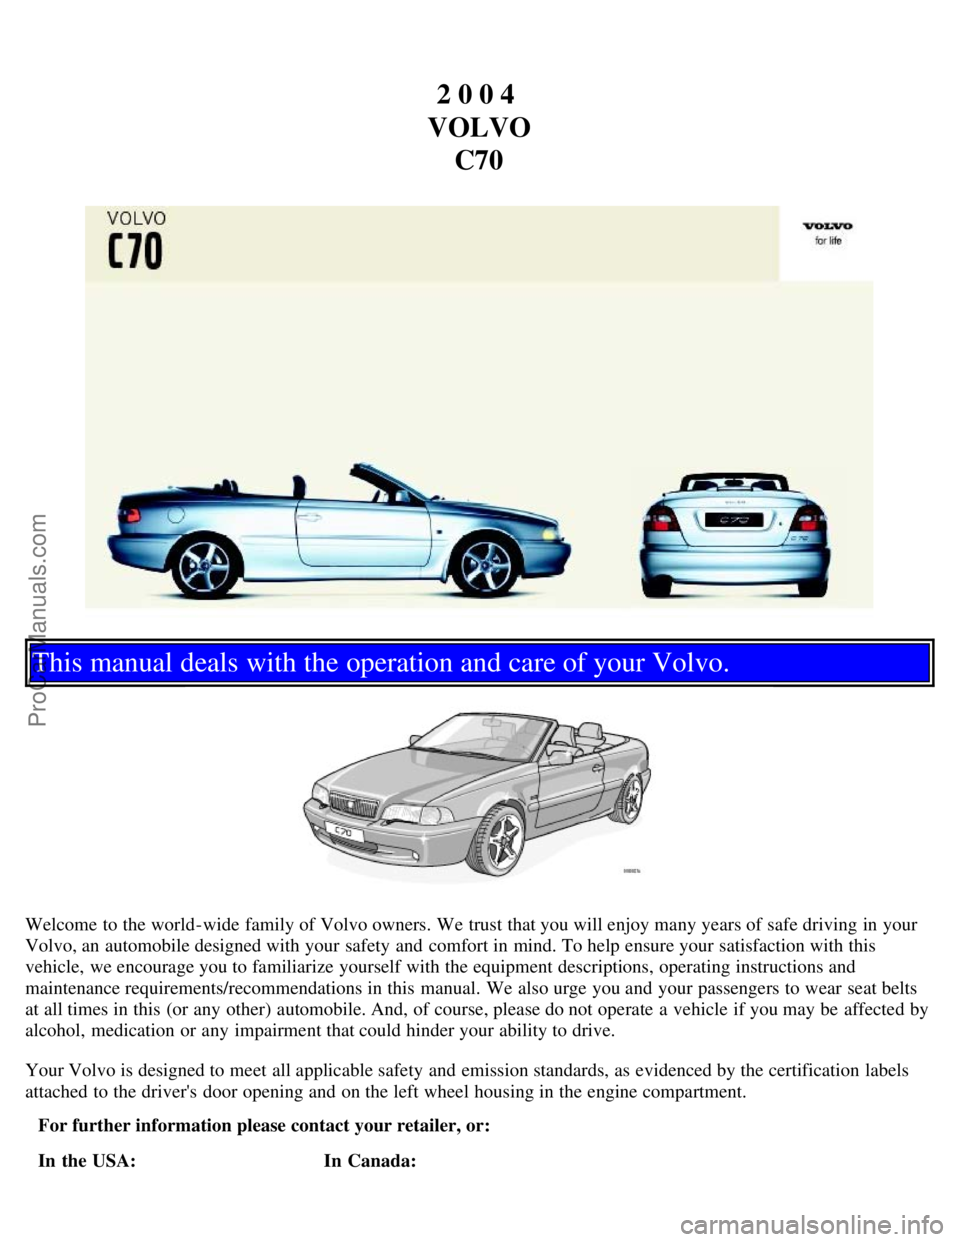 VOLVO C70 2004  Owners Manual 2 0 0 4 
VOLVO C70
This manual deals with the operation and care of your Volvo.
Welcome to the world-wide  family of Volvo owners. We trust that you will enjoy many years of safe driving in your
Volvo